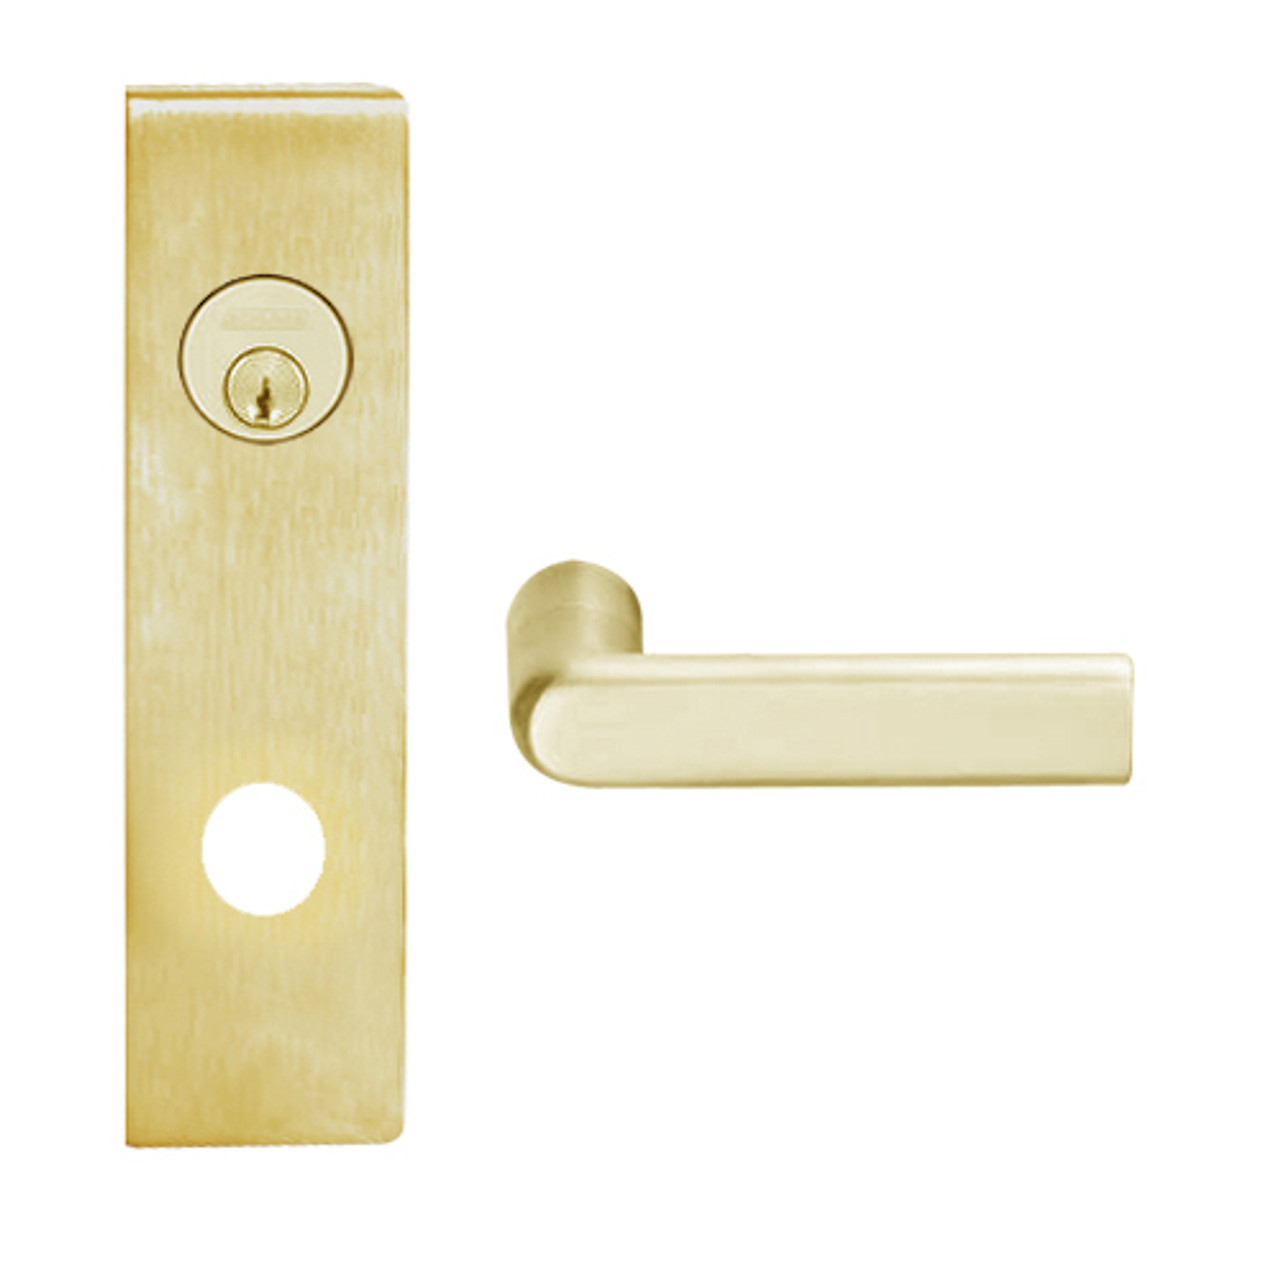 L9026L-01N-606 Schlage L Series Less Cylinder Exit Lock with Cylinder Commercial Mortise Lock with 01 Cast Lever Design in Satin Brass